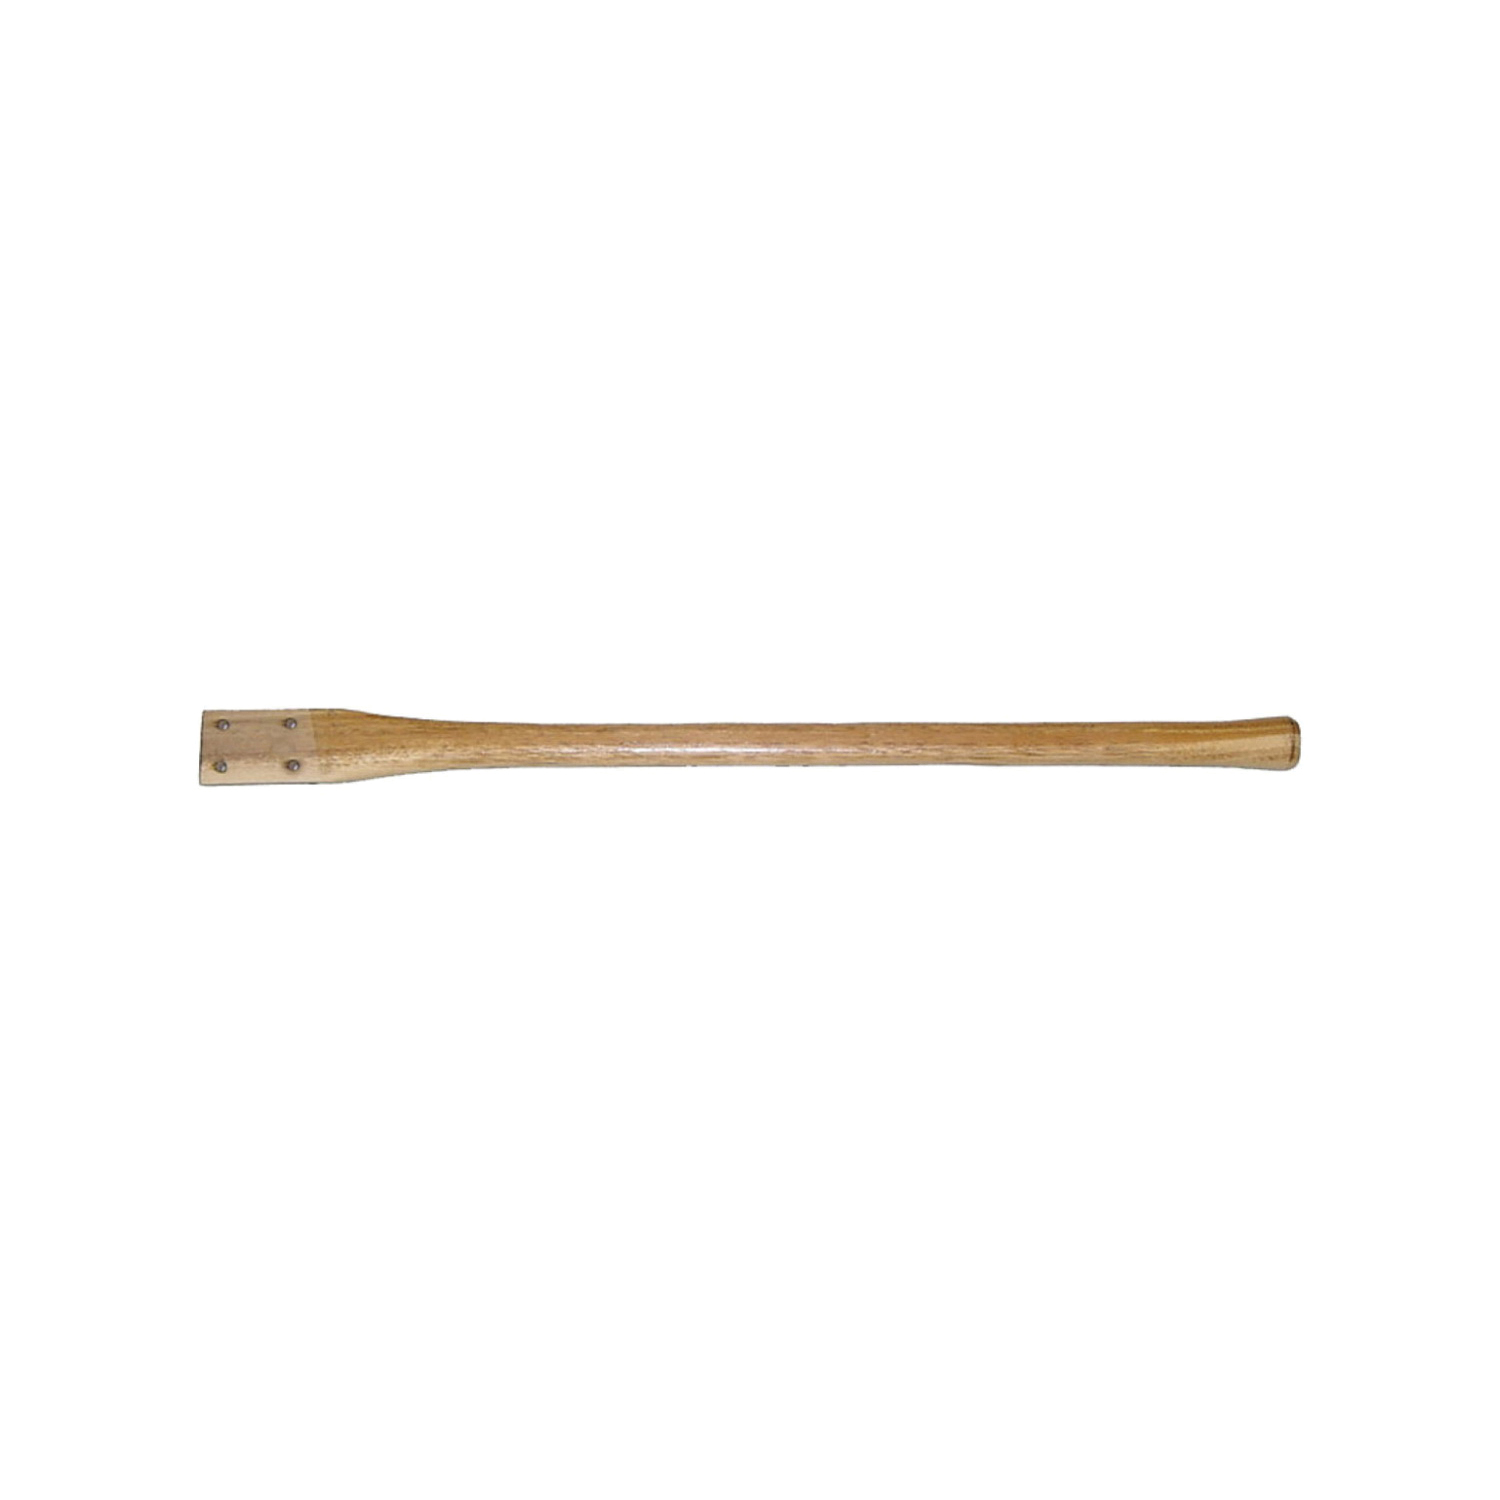 65220 Ditch Bank Blade Handle, 40 in L, American Hickory Wood, Clear Lacquer, For: 4-Hole Blades